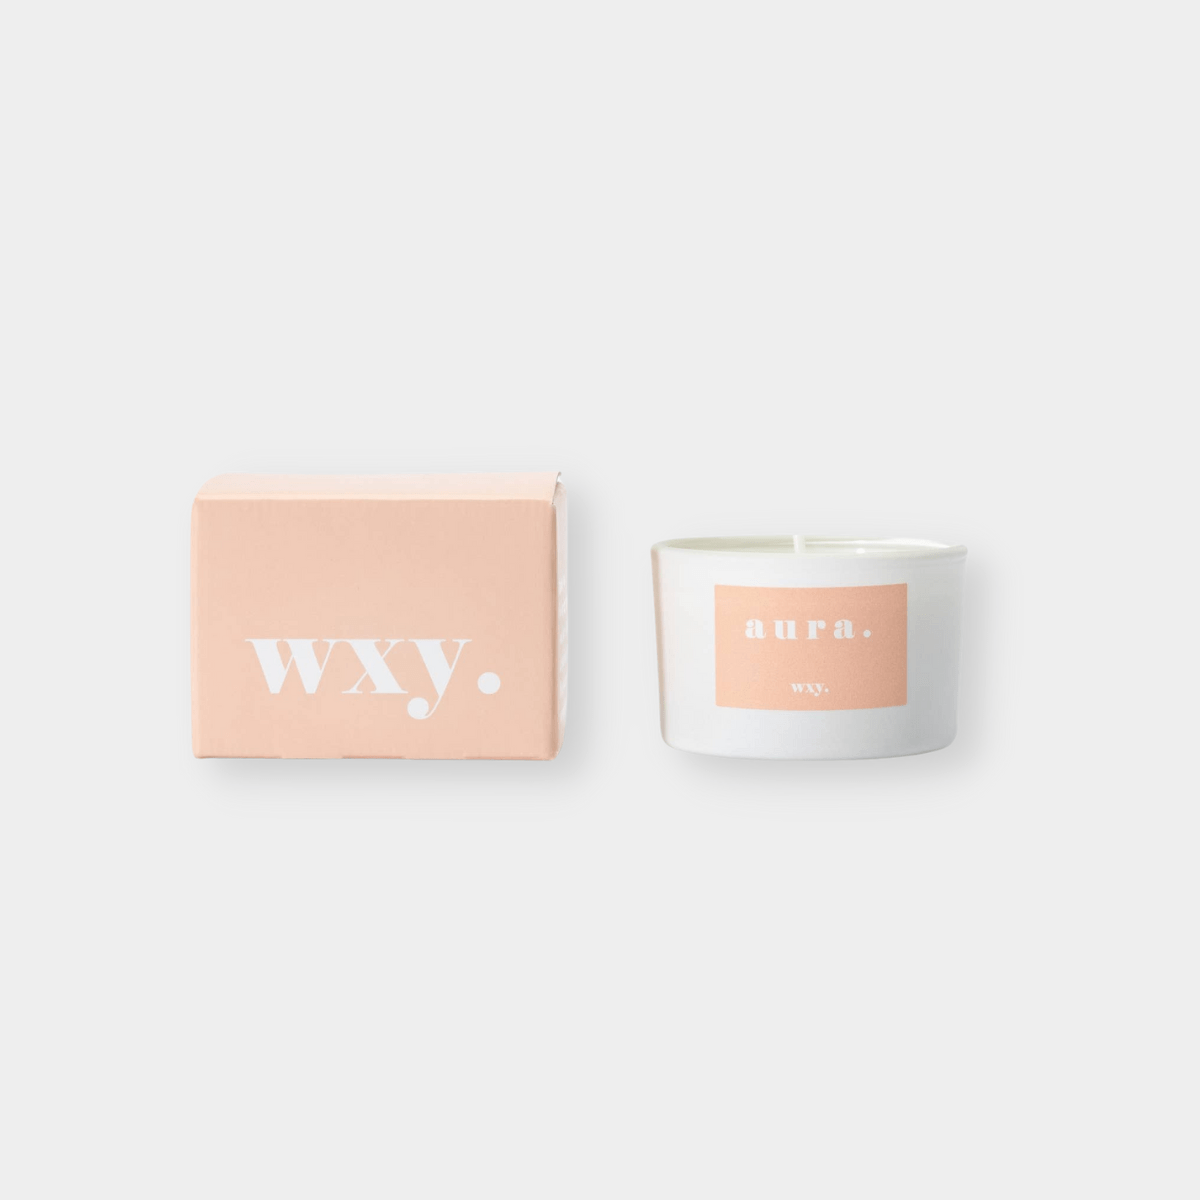 wxy. Accessories wxy. Aura 3oz Candle - White Woods + Amber (7817468805369)